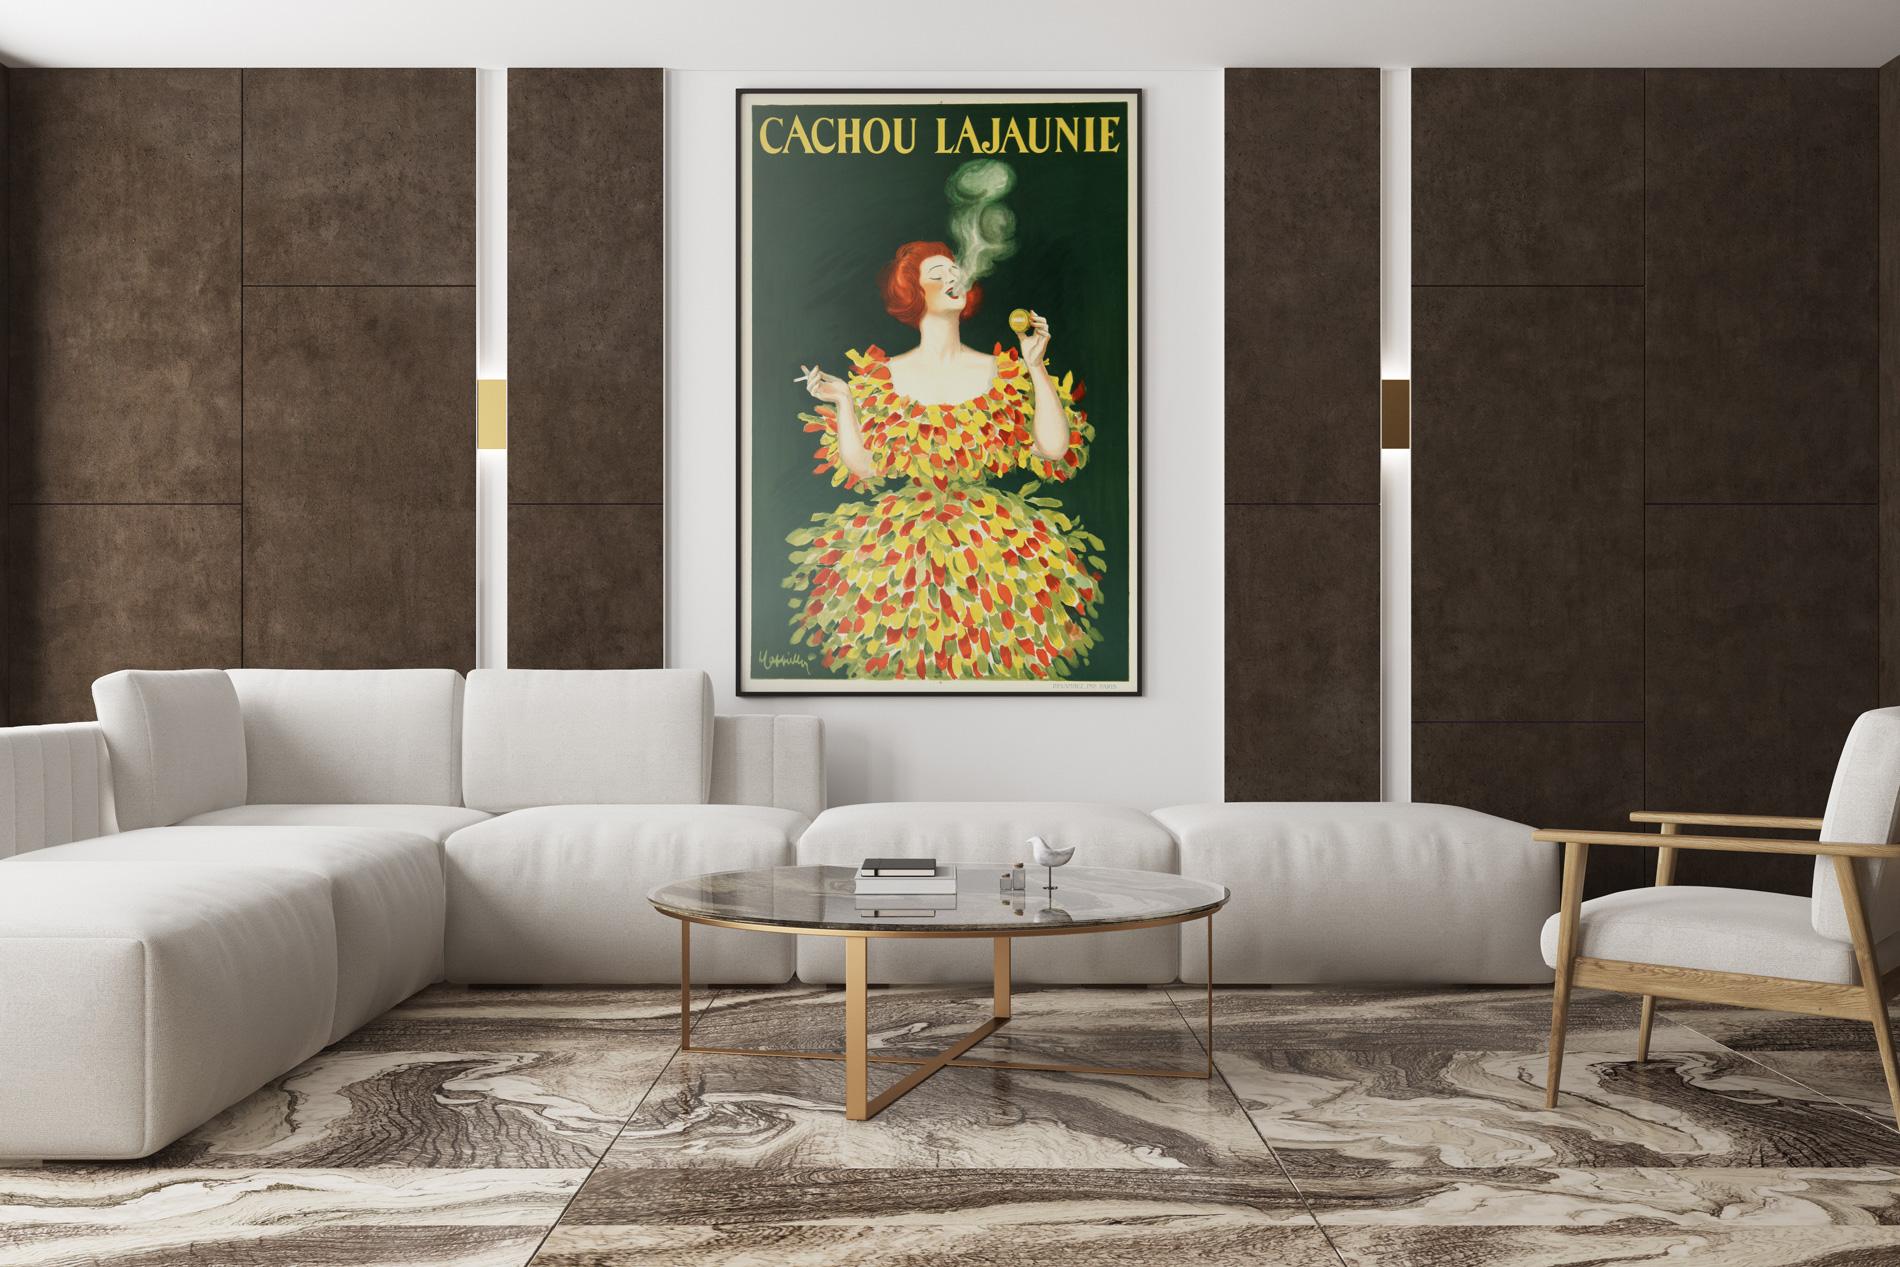 Original 1920s French vintage Cachou Lajaunie advertising poster featuring a beautiful design by poster artist Leonetto Cappiello. We love Cappiello's design of a fabulously dressed lady smoking whilst confidently holding aloft her Cachou Laujaunie